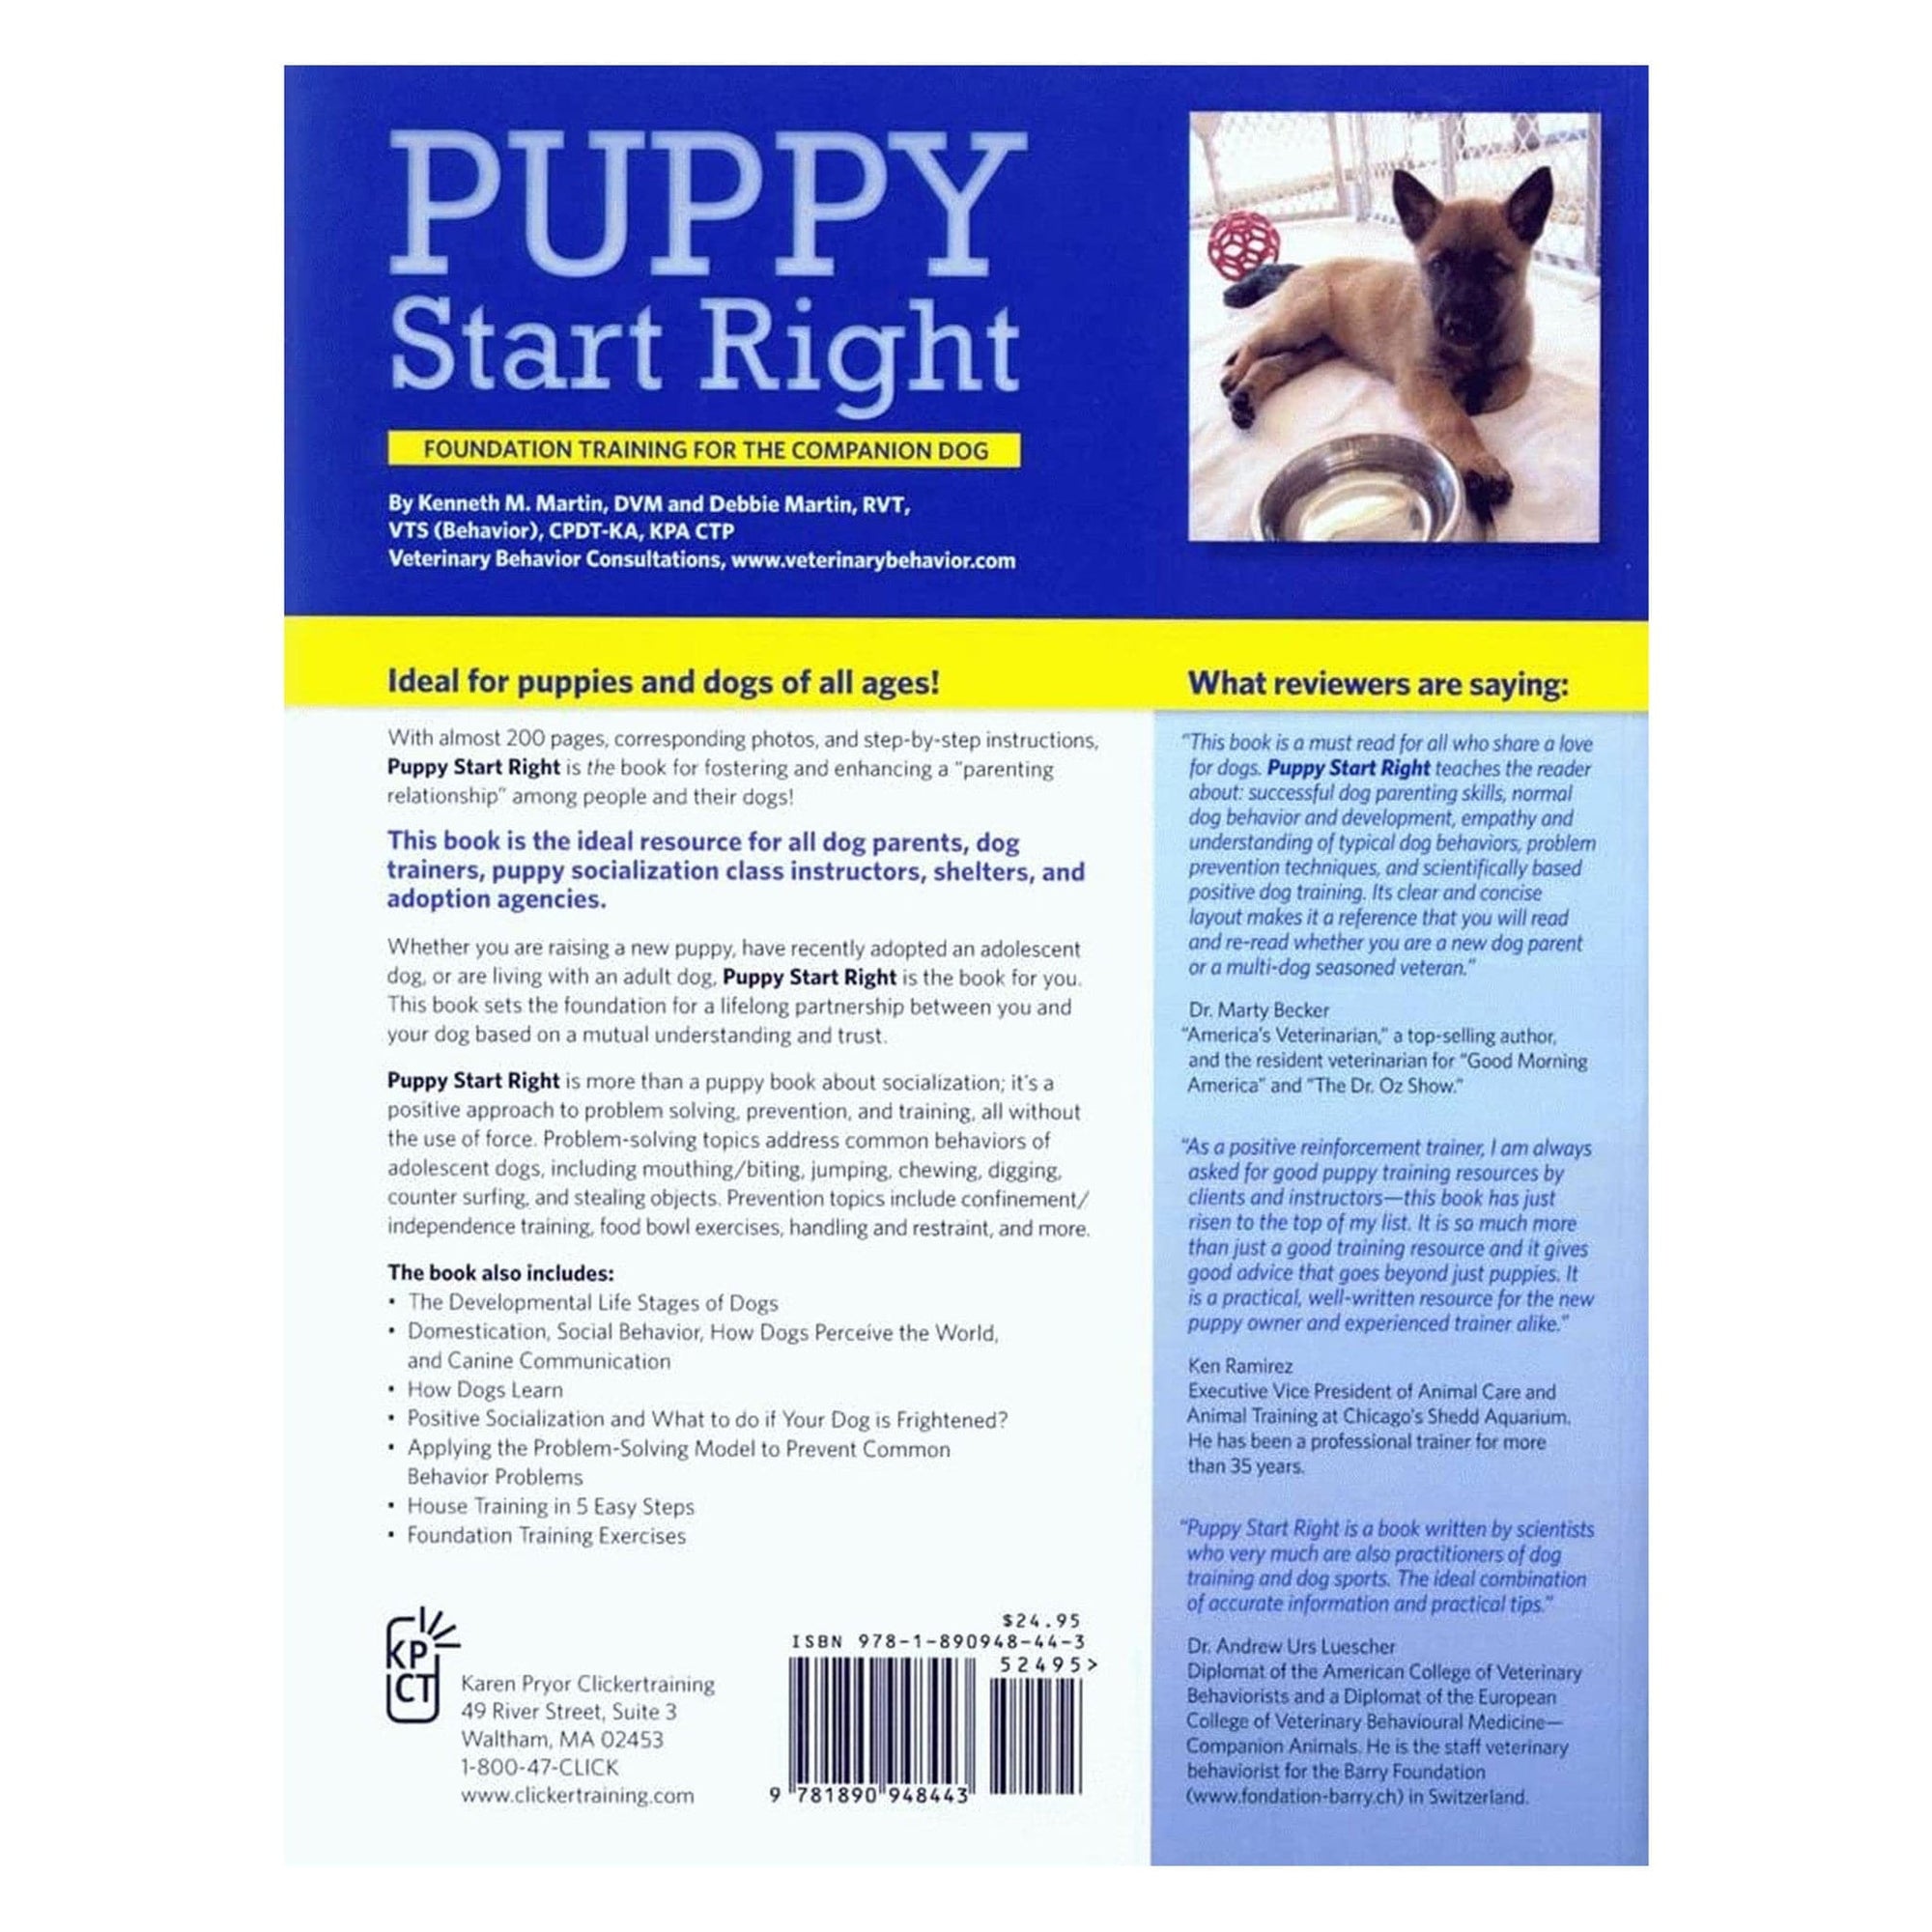 E-BOOK Puppy Start Right: Foundation Training for the Companion Dog By Kenneth Martin, DVM, and Debbie Martin, RVT, VTS